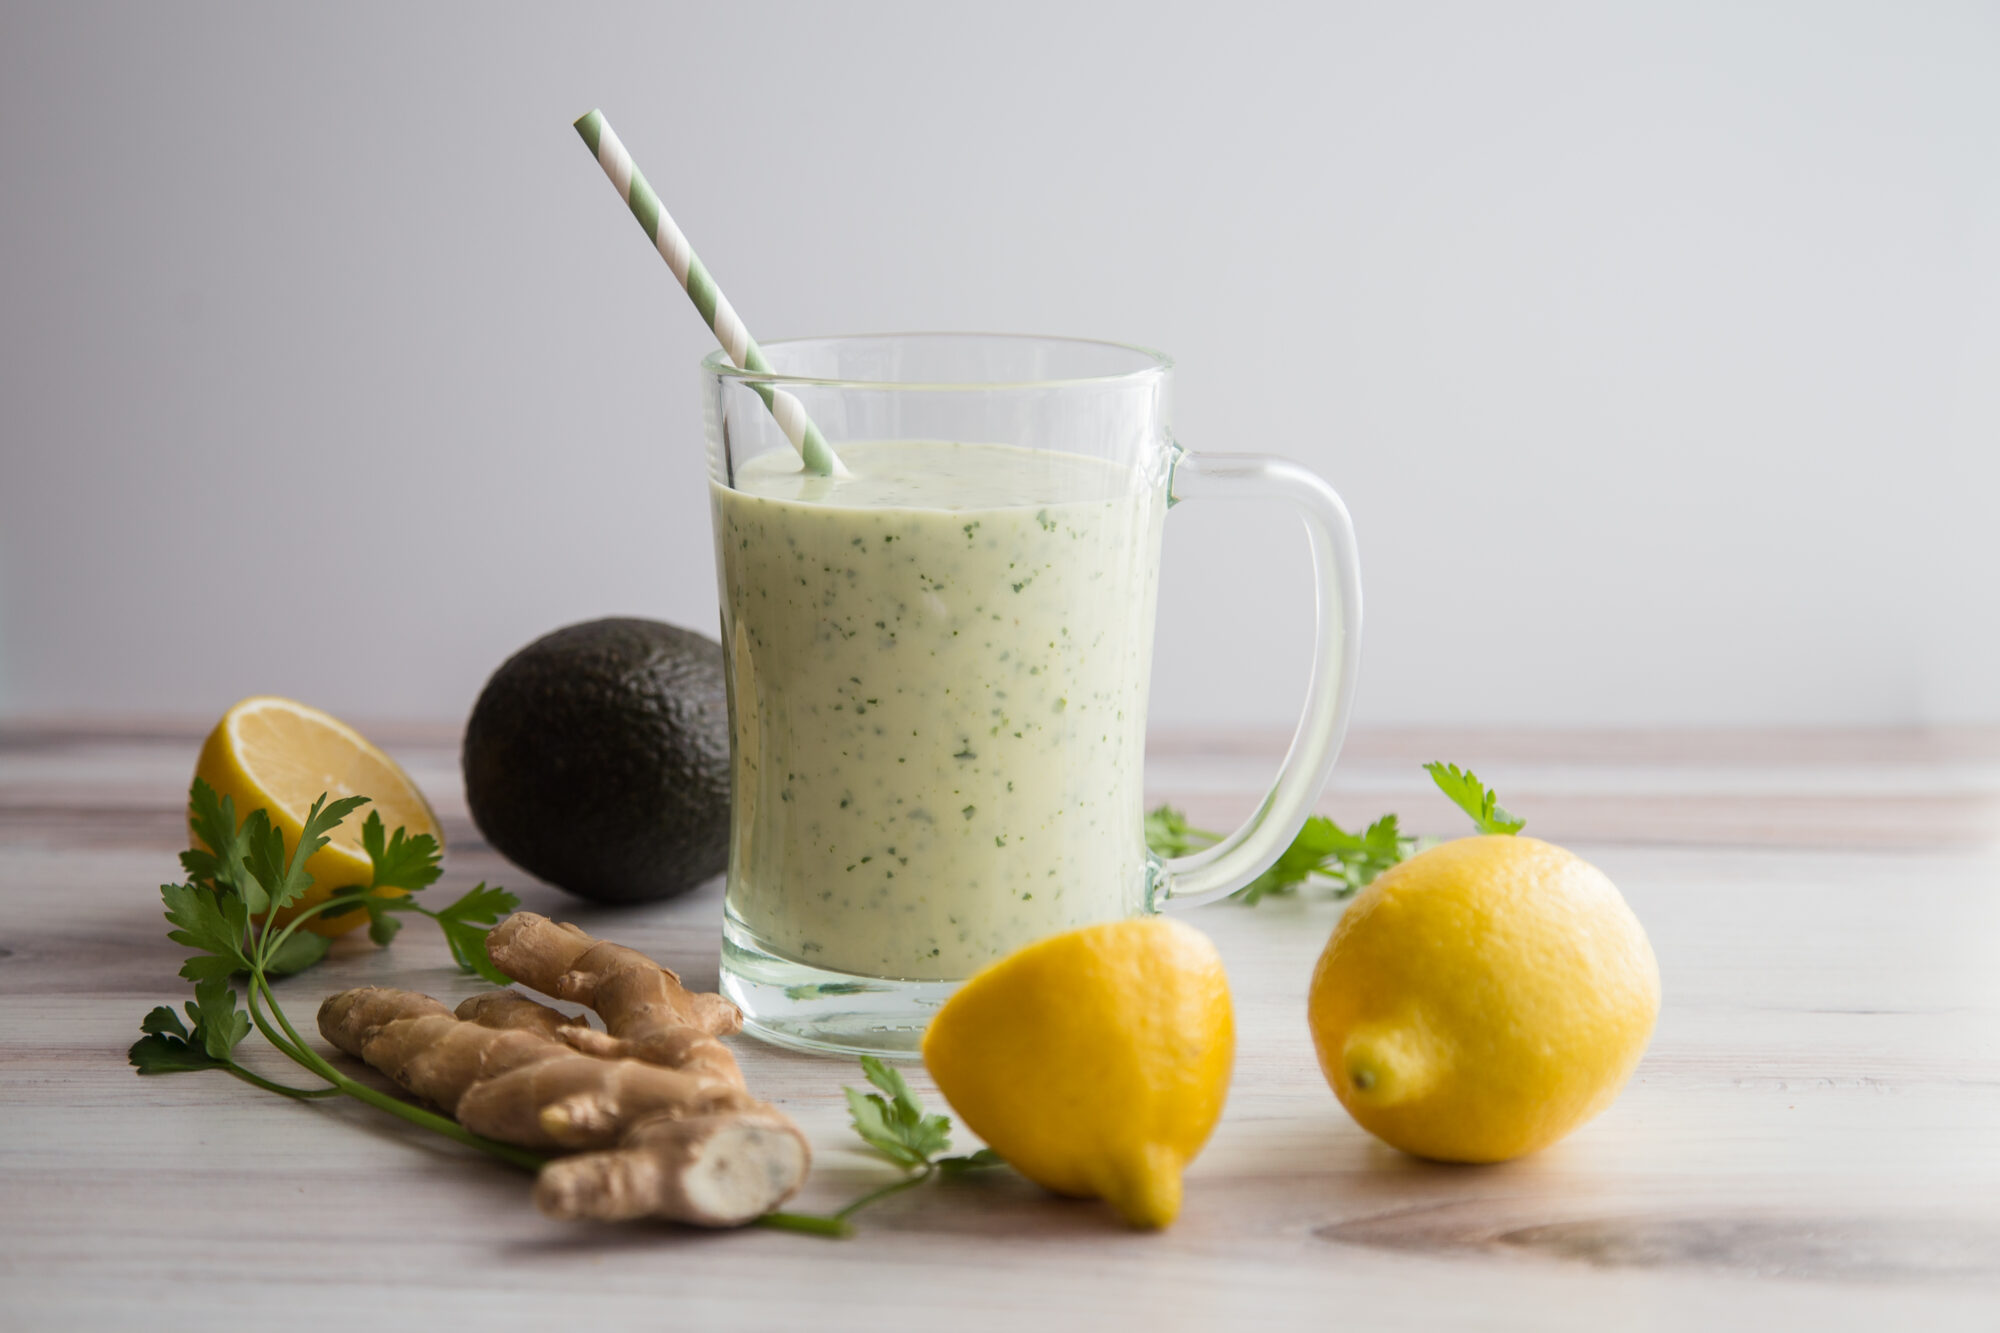 Distant view-Close up-glass mug with green smoothie. Green and white straw in the smoothie. Surrounded by lemons, ginger and a coconut.